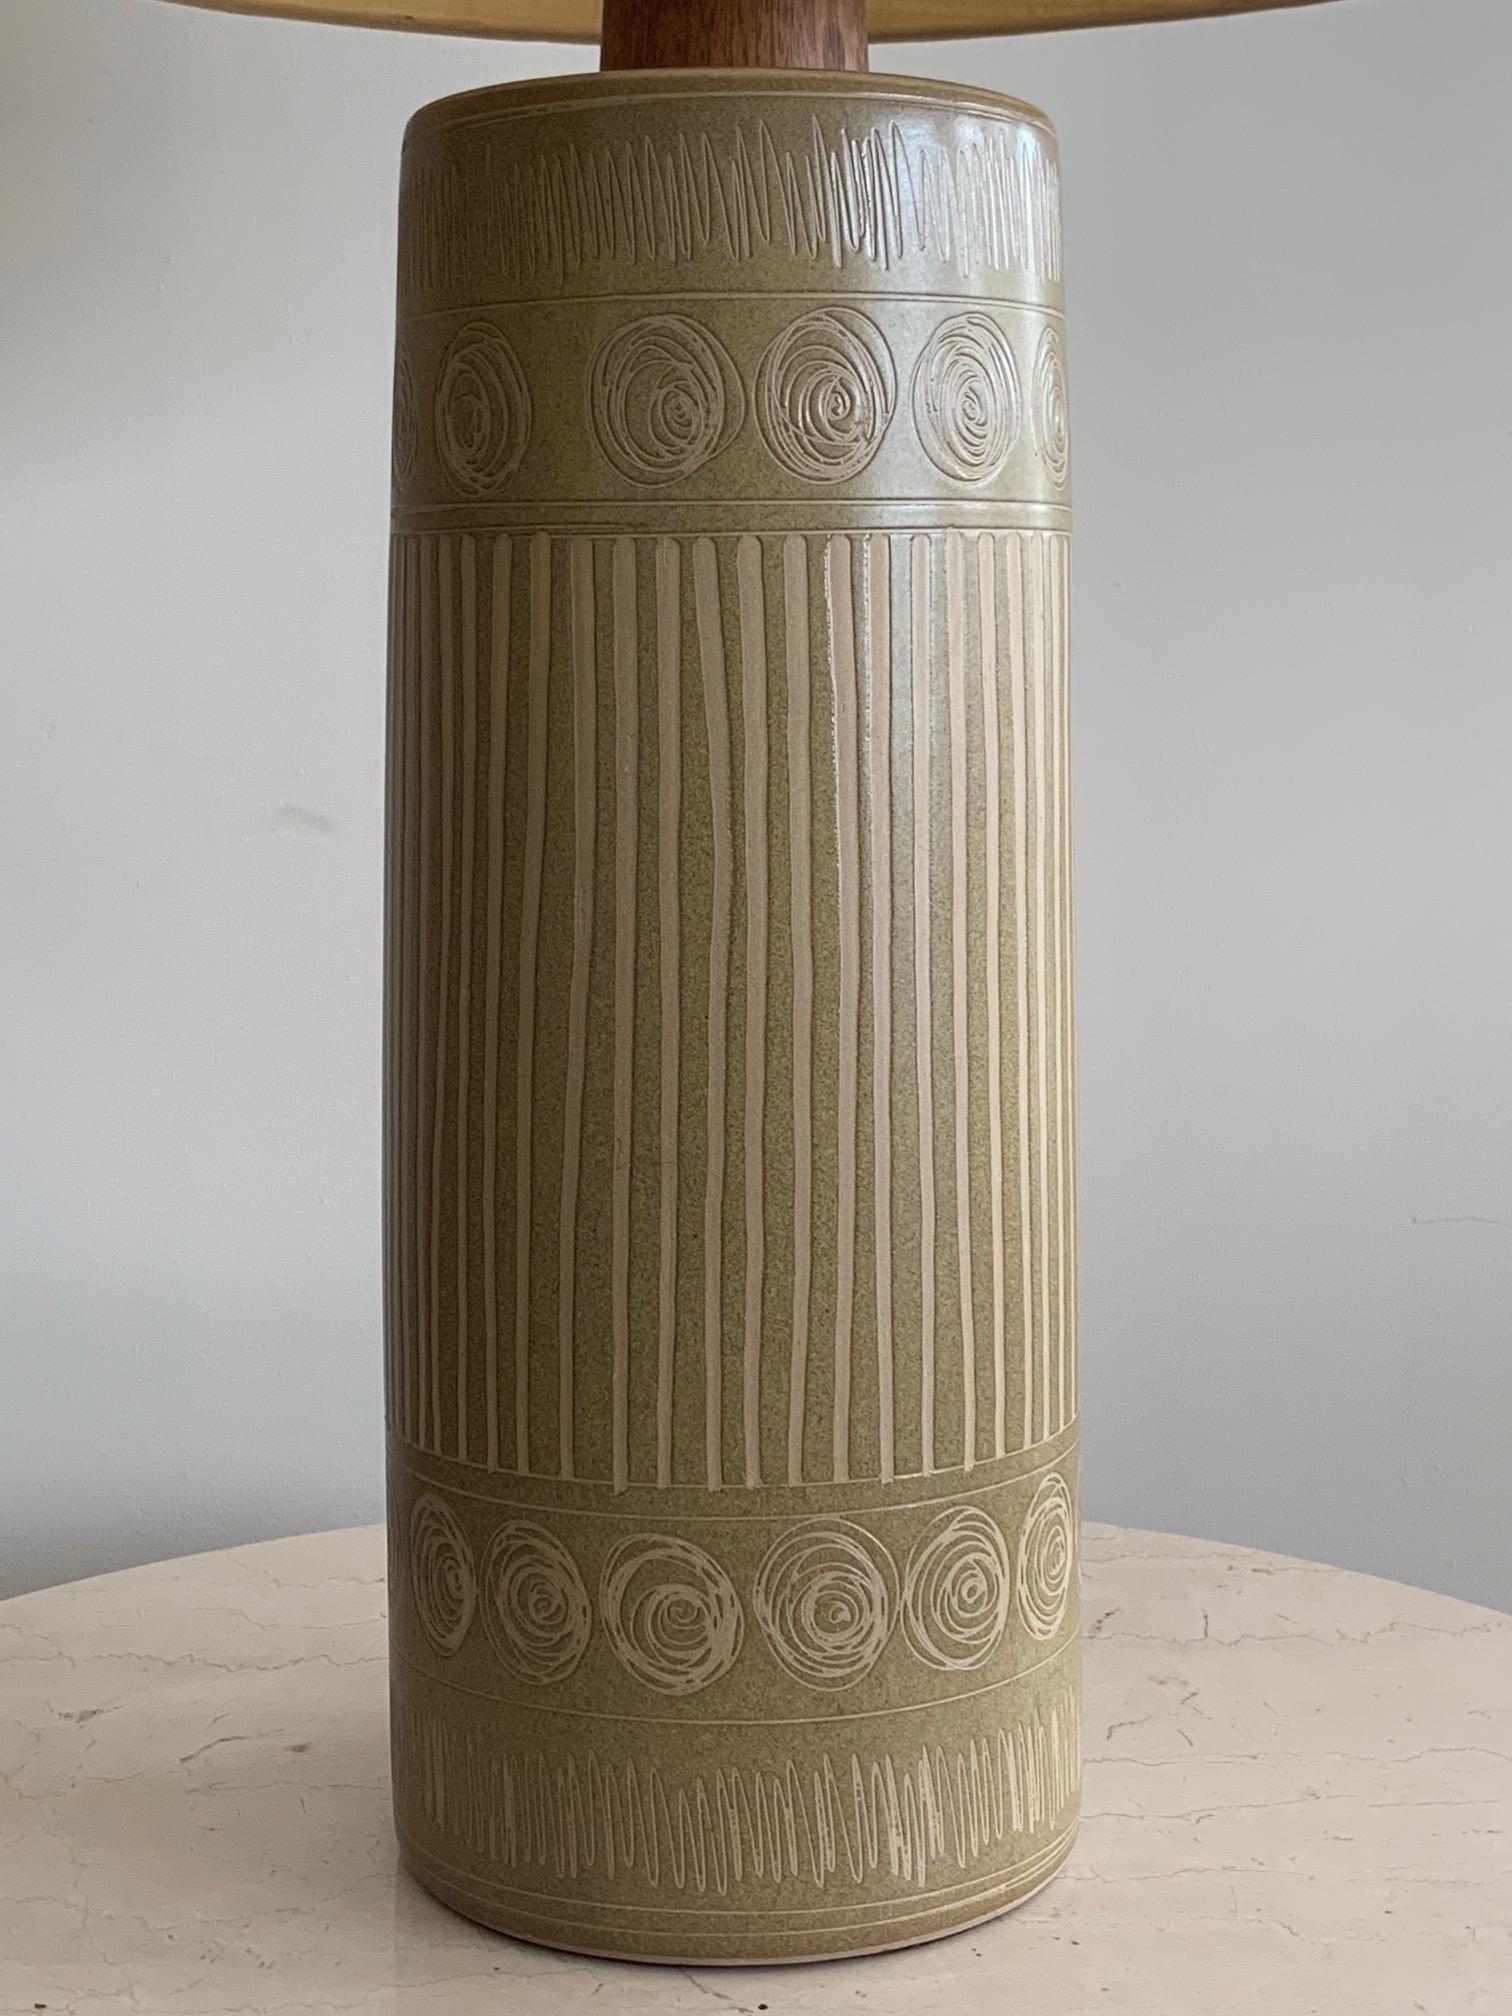 An elegant, large scale ceramic lamp by Marshall Studios with Sgraffito decoration. Original shade included. Ceramic base is 17